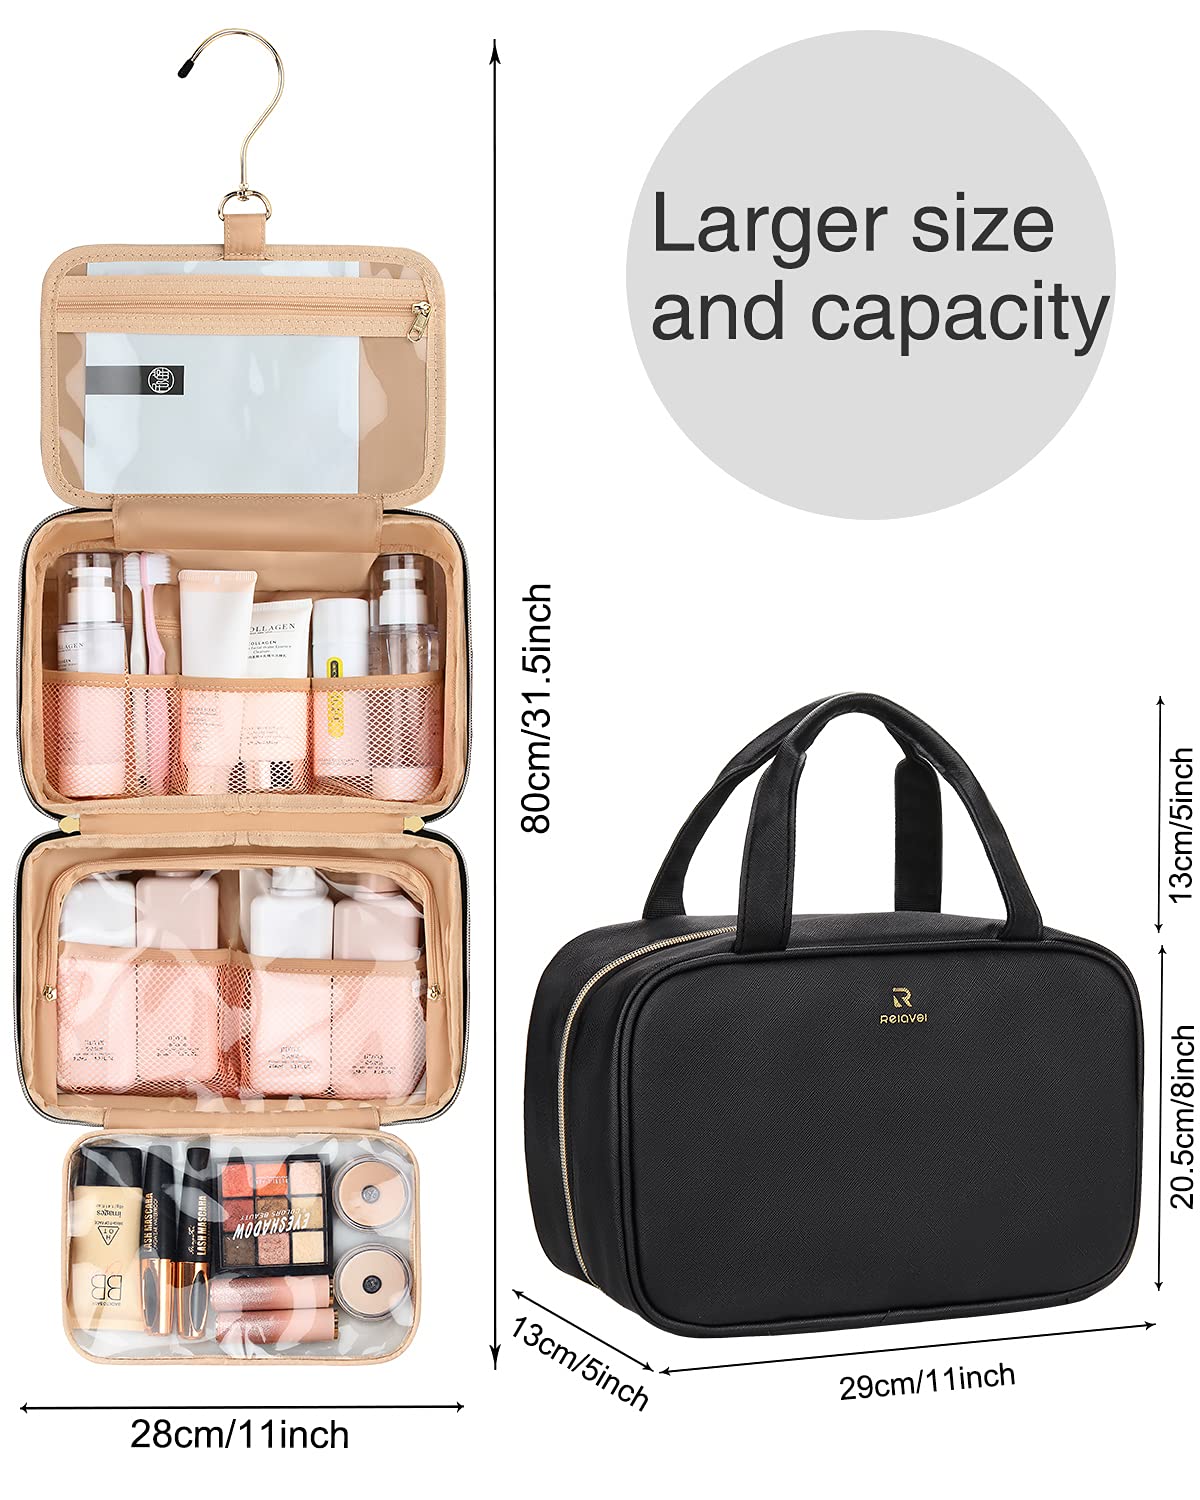 Relavel Toiletry Bag, Travel Hanging Toiletry Bag for Men and Women, Makeup Cosmetic Bag Travel Organizer for Toiletries, Shampoo, Water-resistant Leather and Lining, Full Sized Container Travel Bag